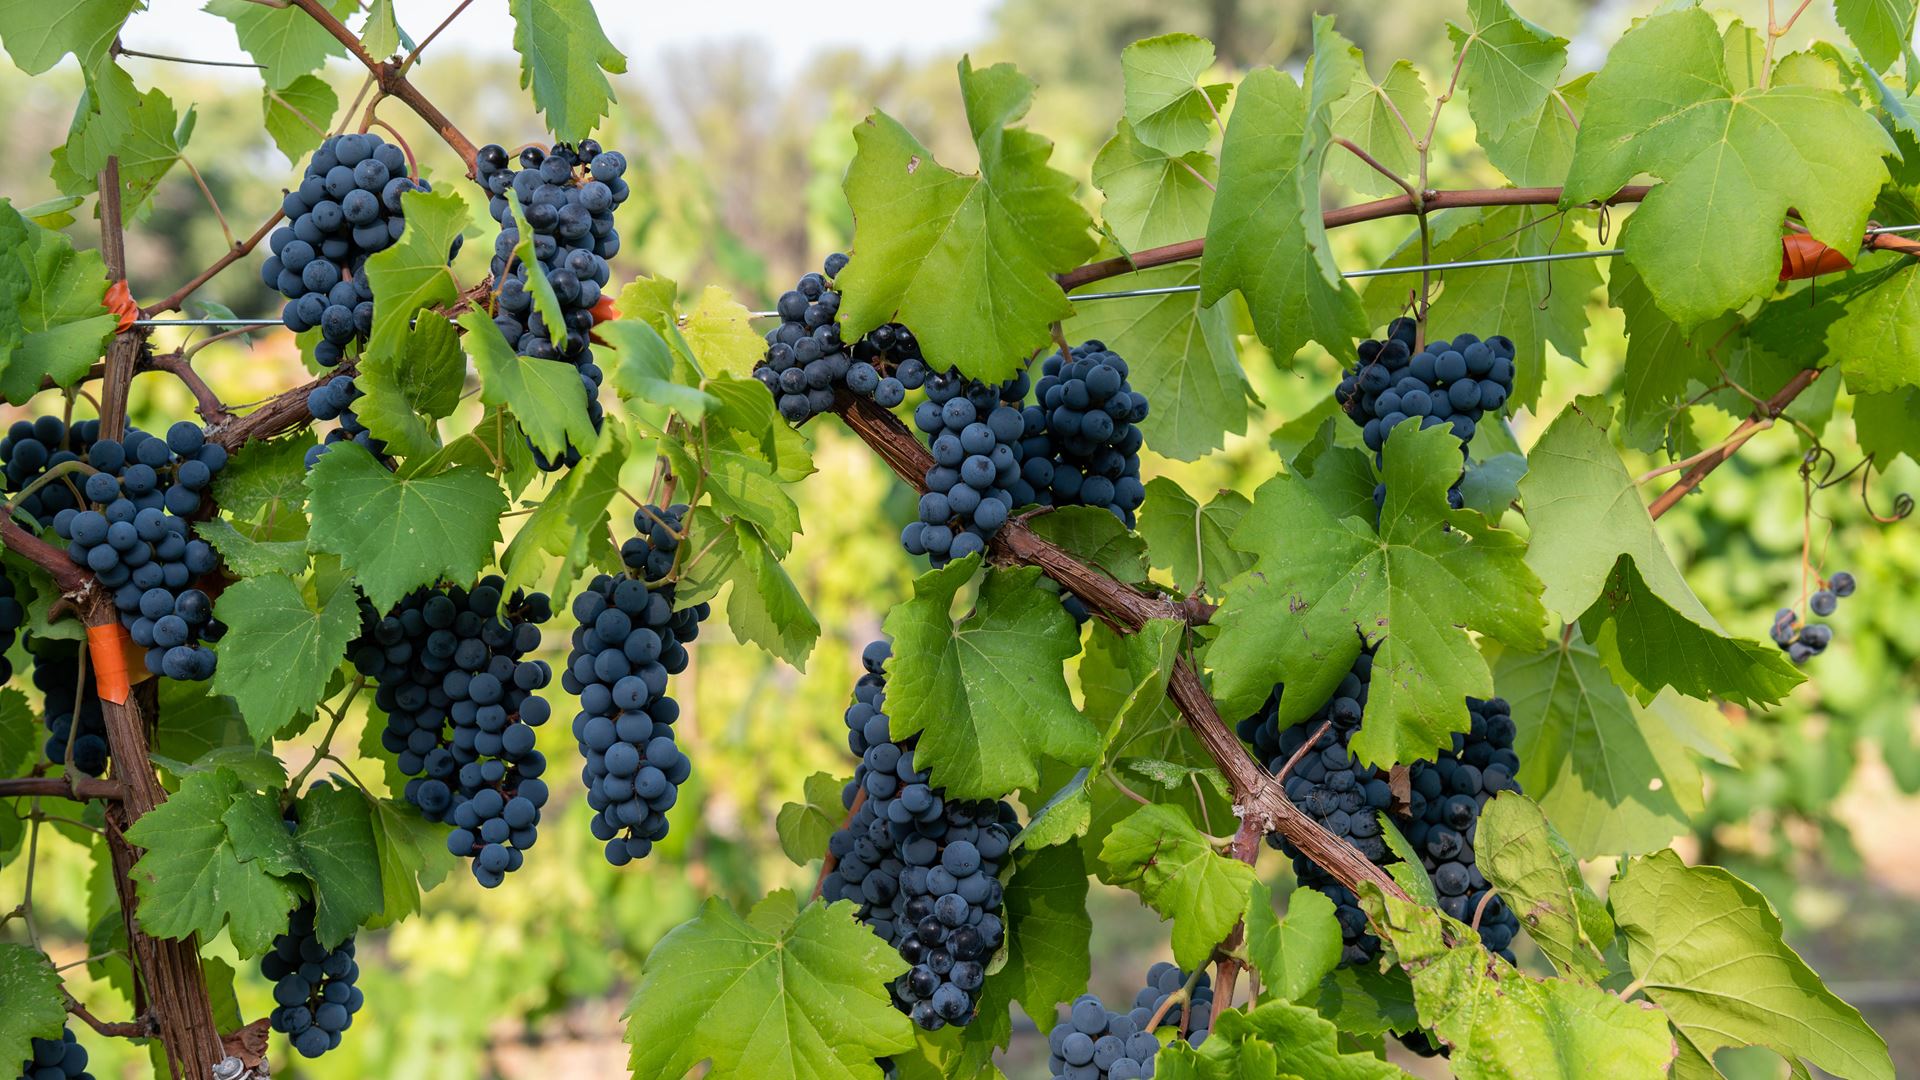 Grape expectations: AES project examines how cover crops can improve vineyards and pollinator habitats